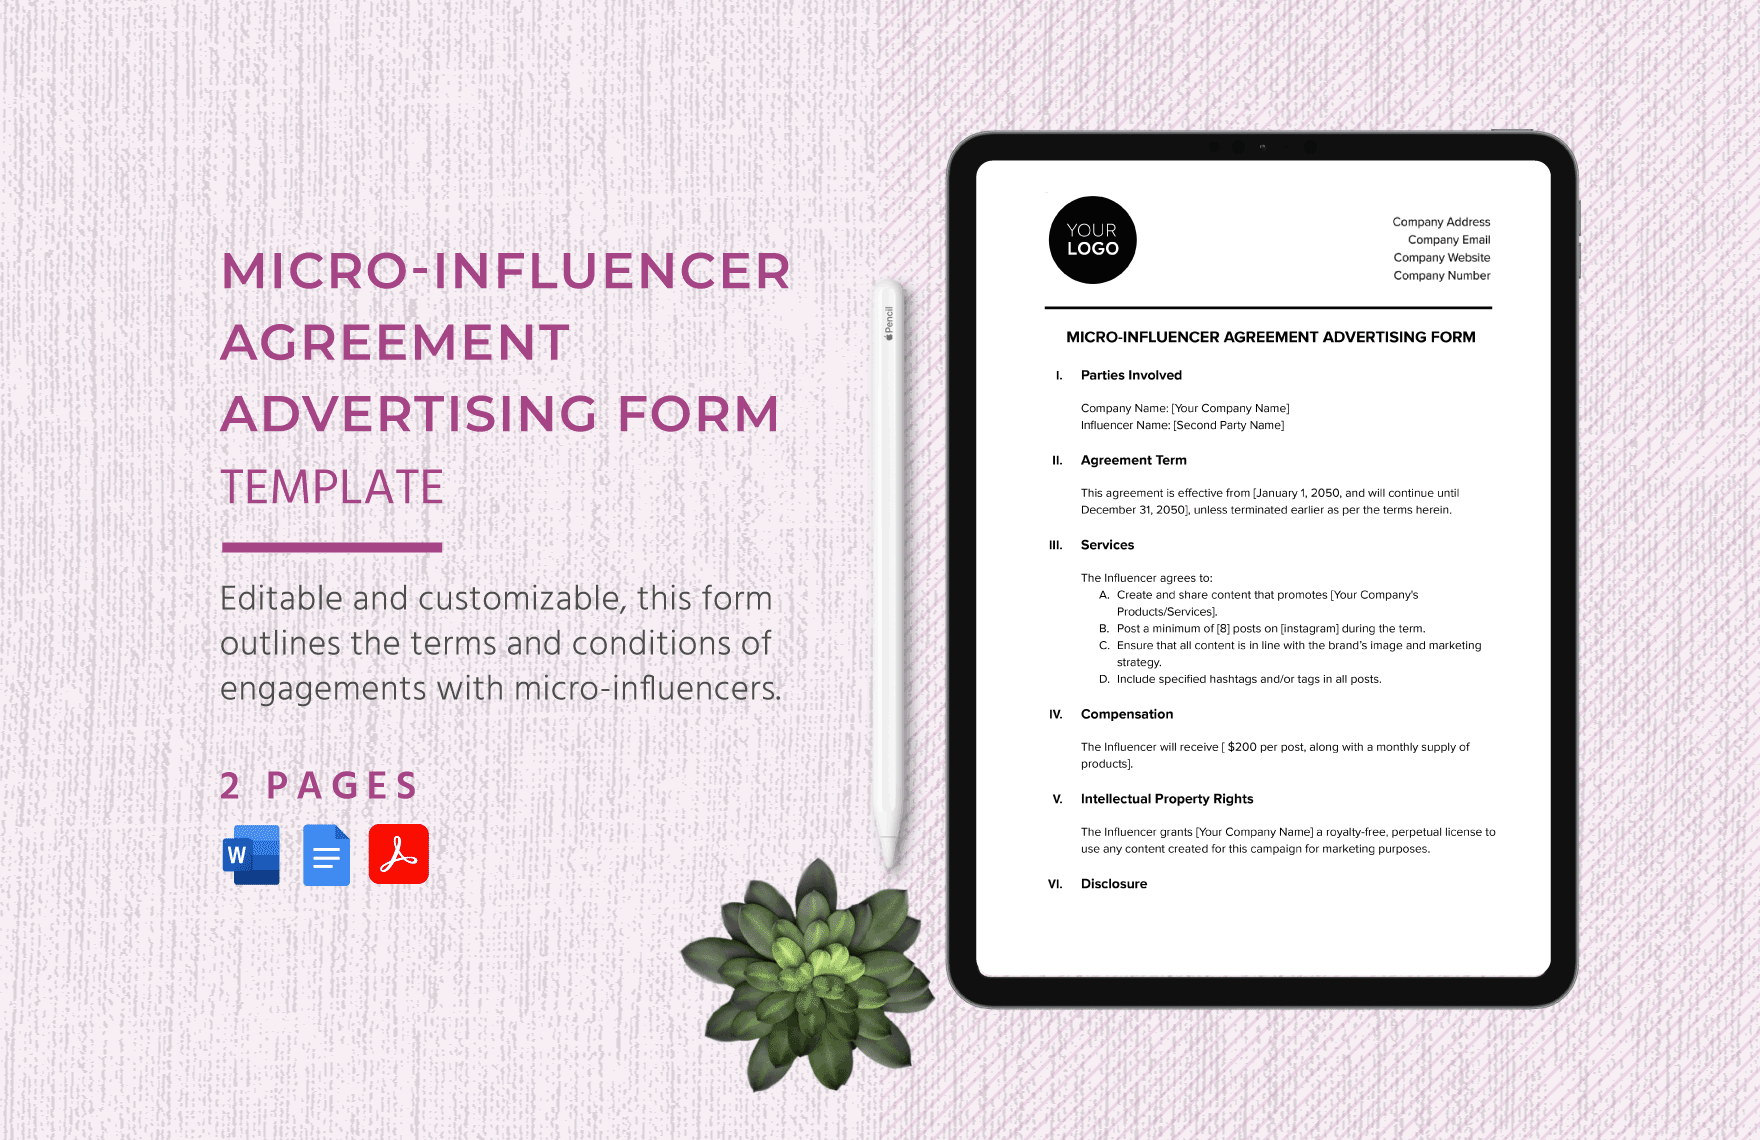 Micro-Influencer Agreement Advertising Form Template